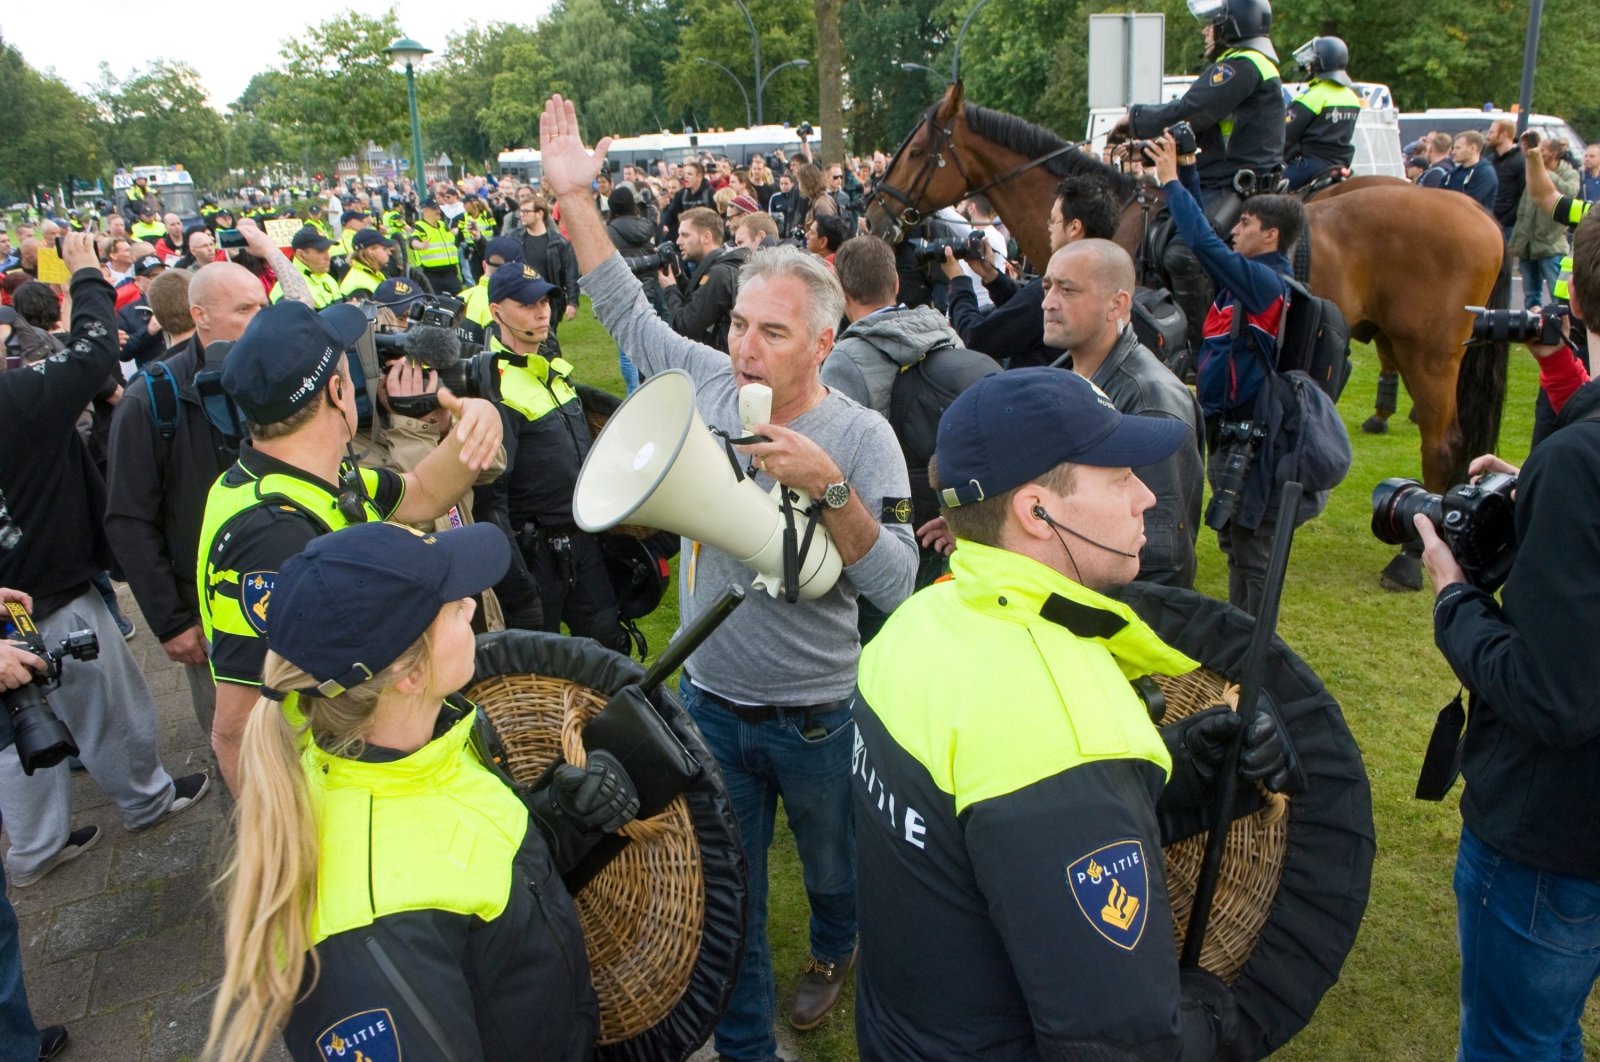 Dutch politician Edwin Wagensveld, the head of the far-right Pegida addresses an anti-Islam demonstration in Enschede, the Netherlands, Sept. 17, 2017. (Shutterstock File Photo)